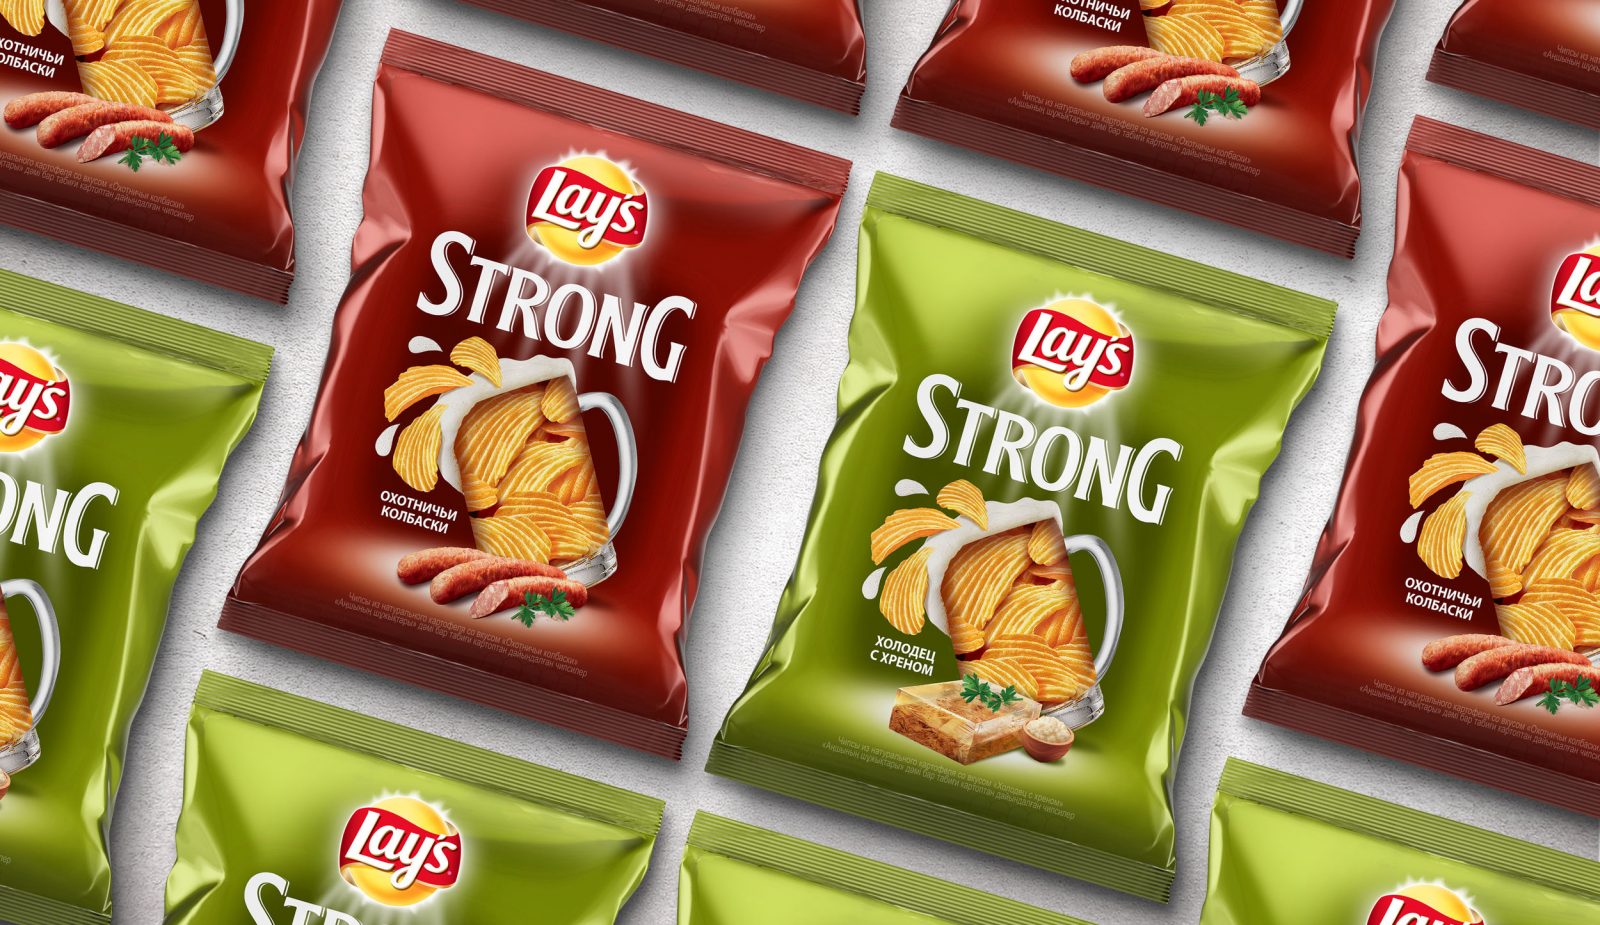 Lays Strong Chips for Beer Packaging Design